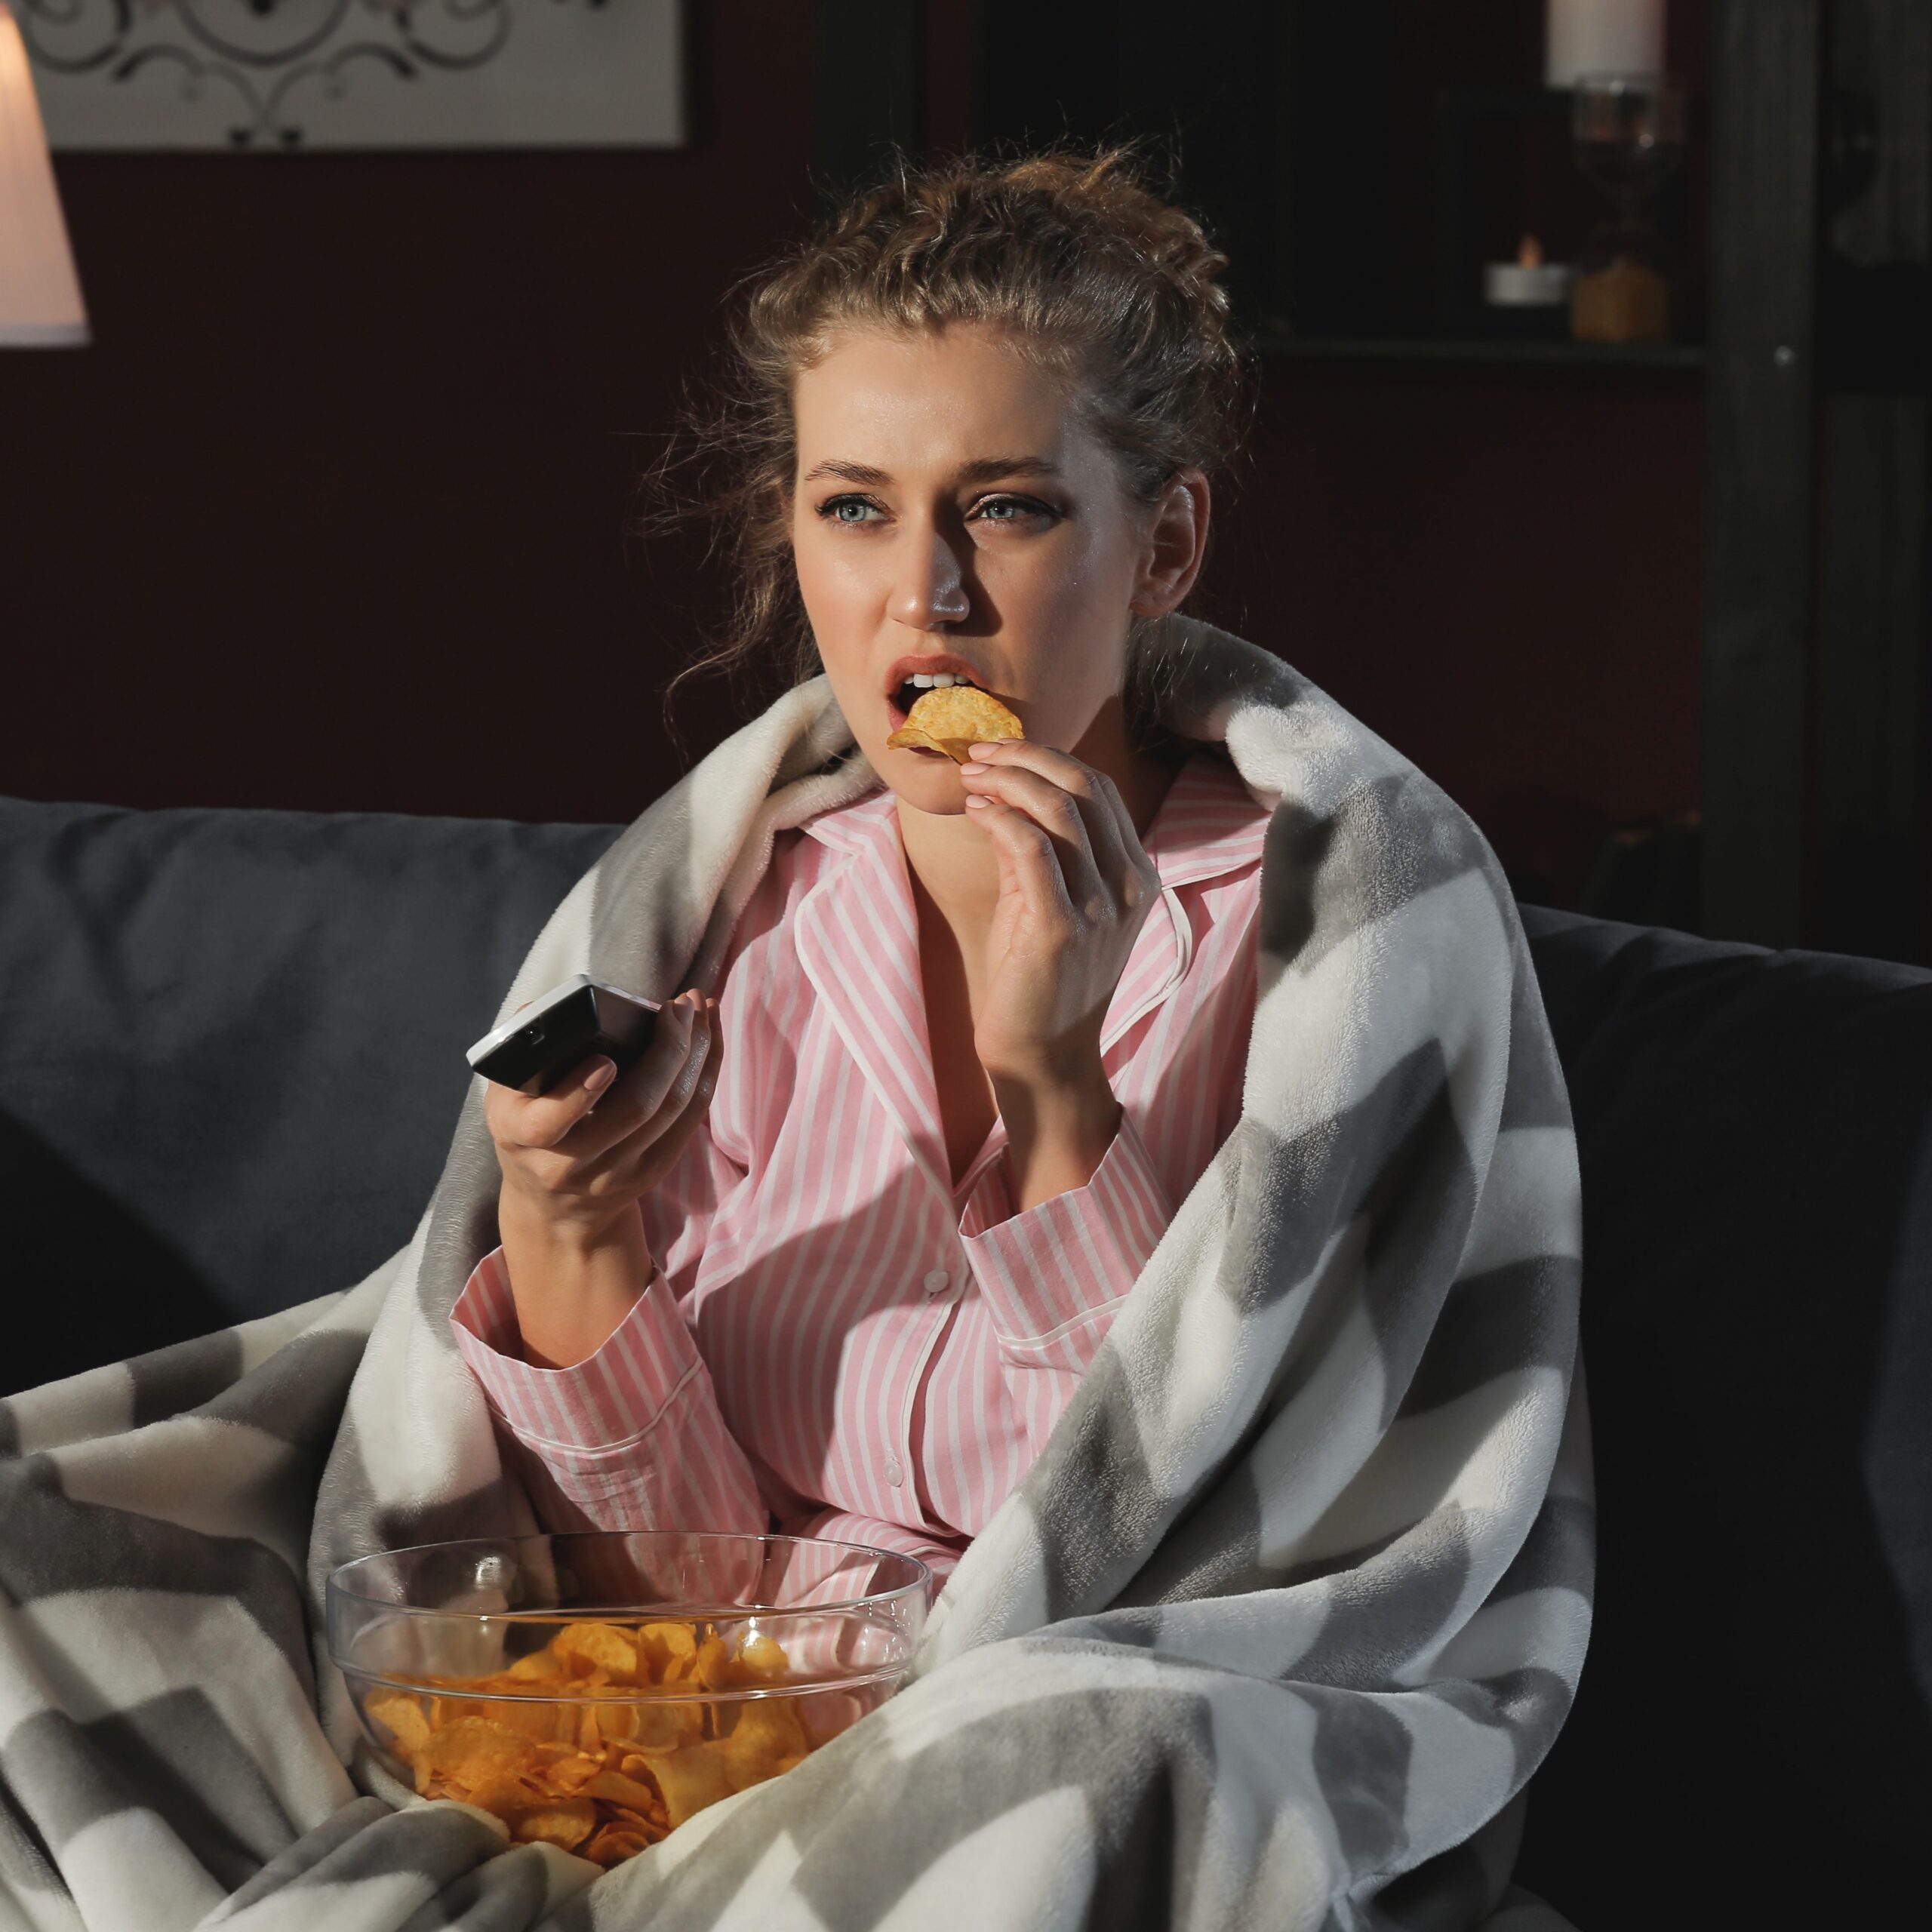 woman sitting on couch eating snack